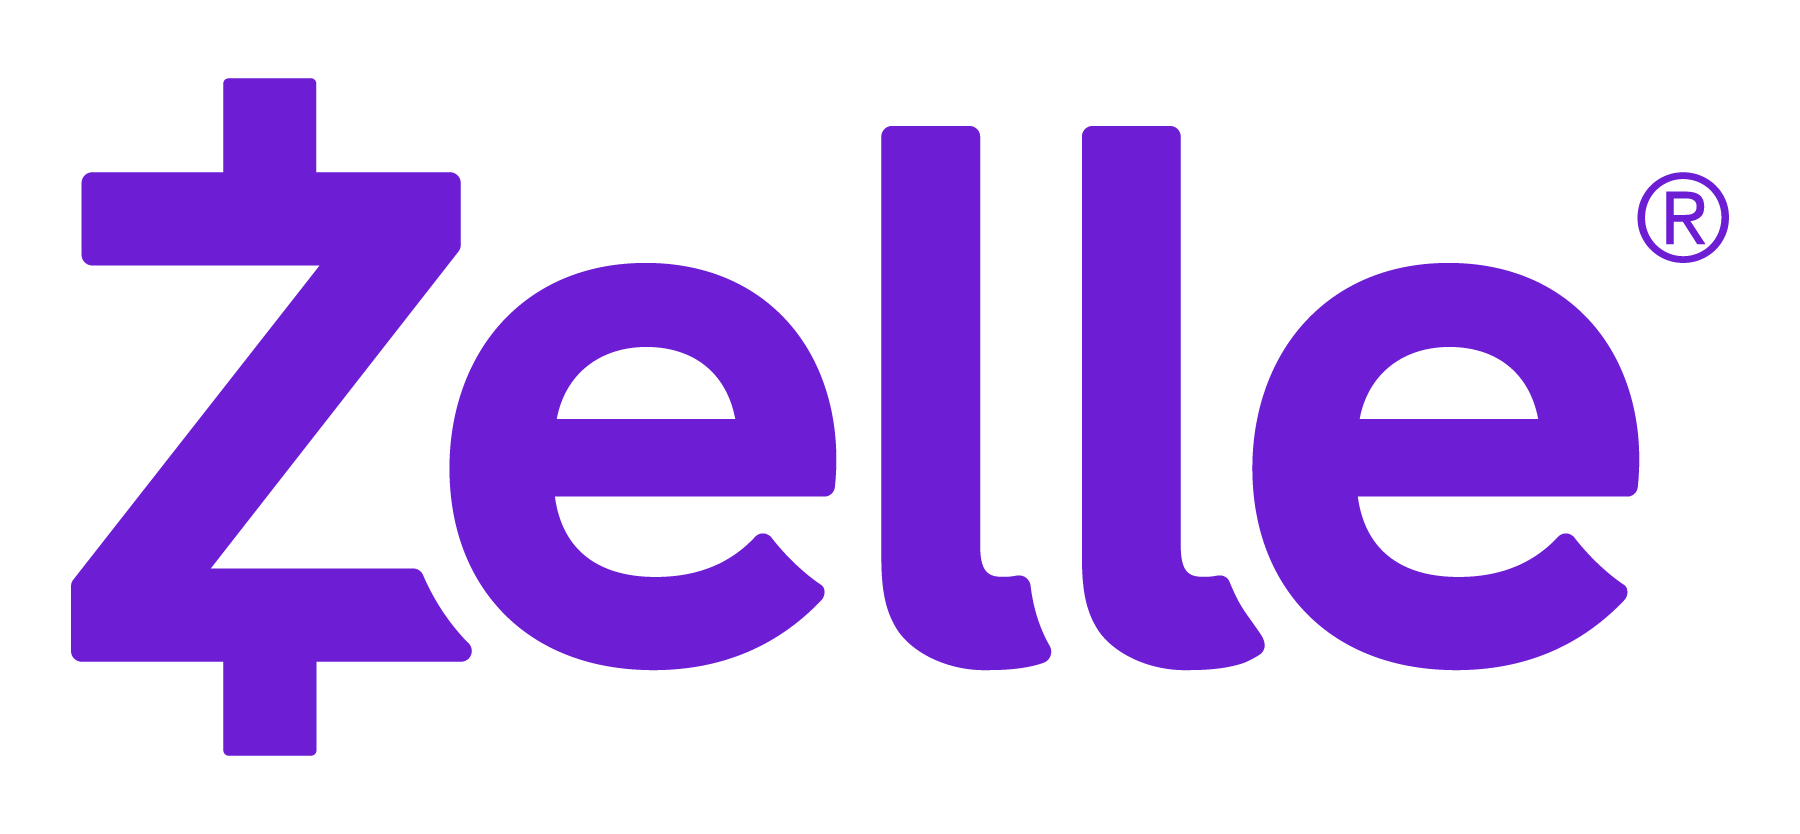 This content on payment scams was developed in partnership with Zelle®. Learn how you can easily send money to friends and family with Zelle® .